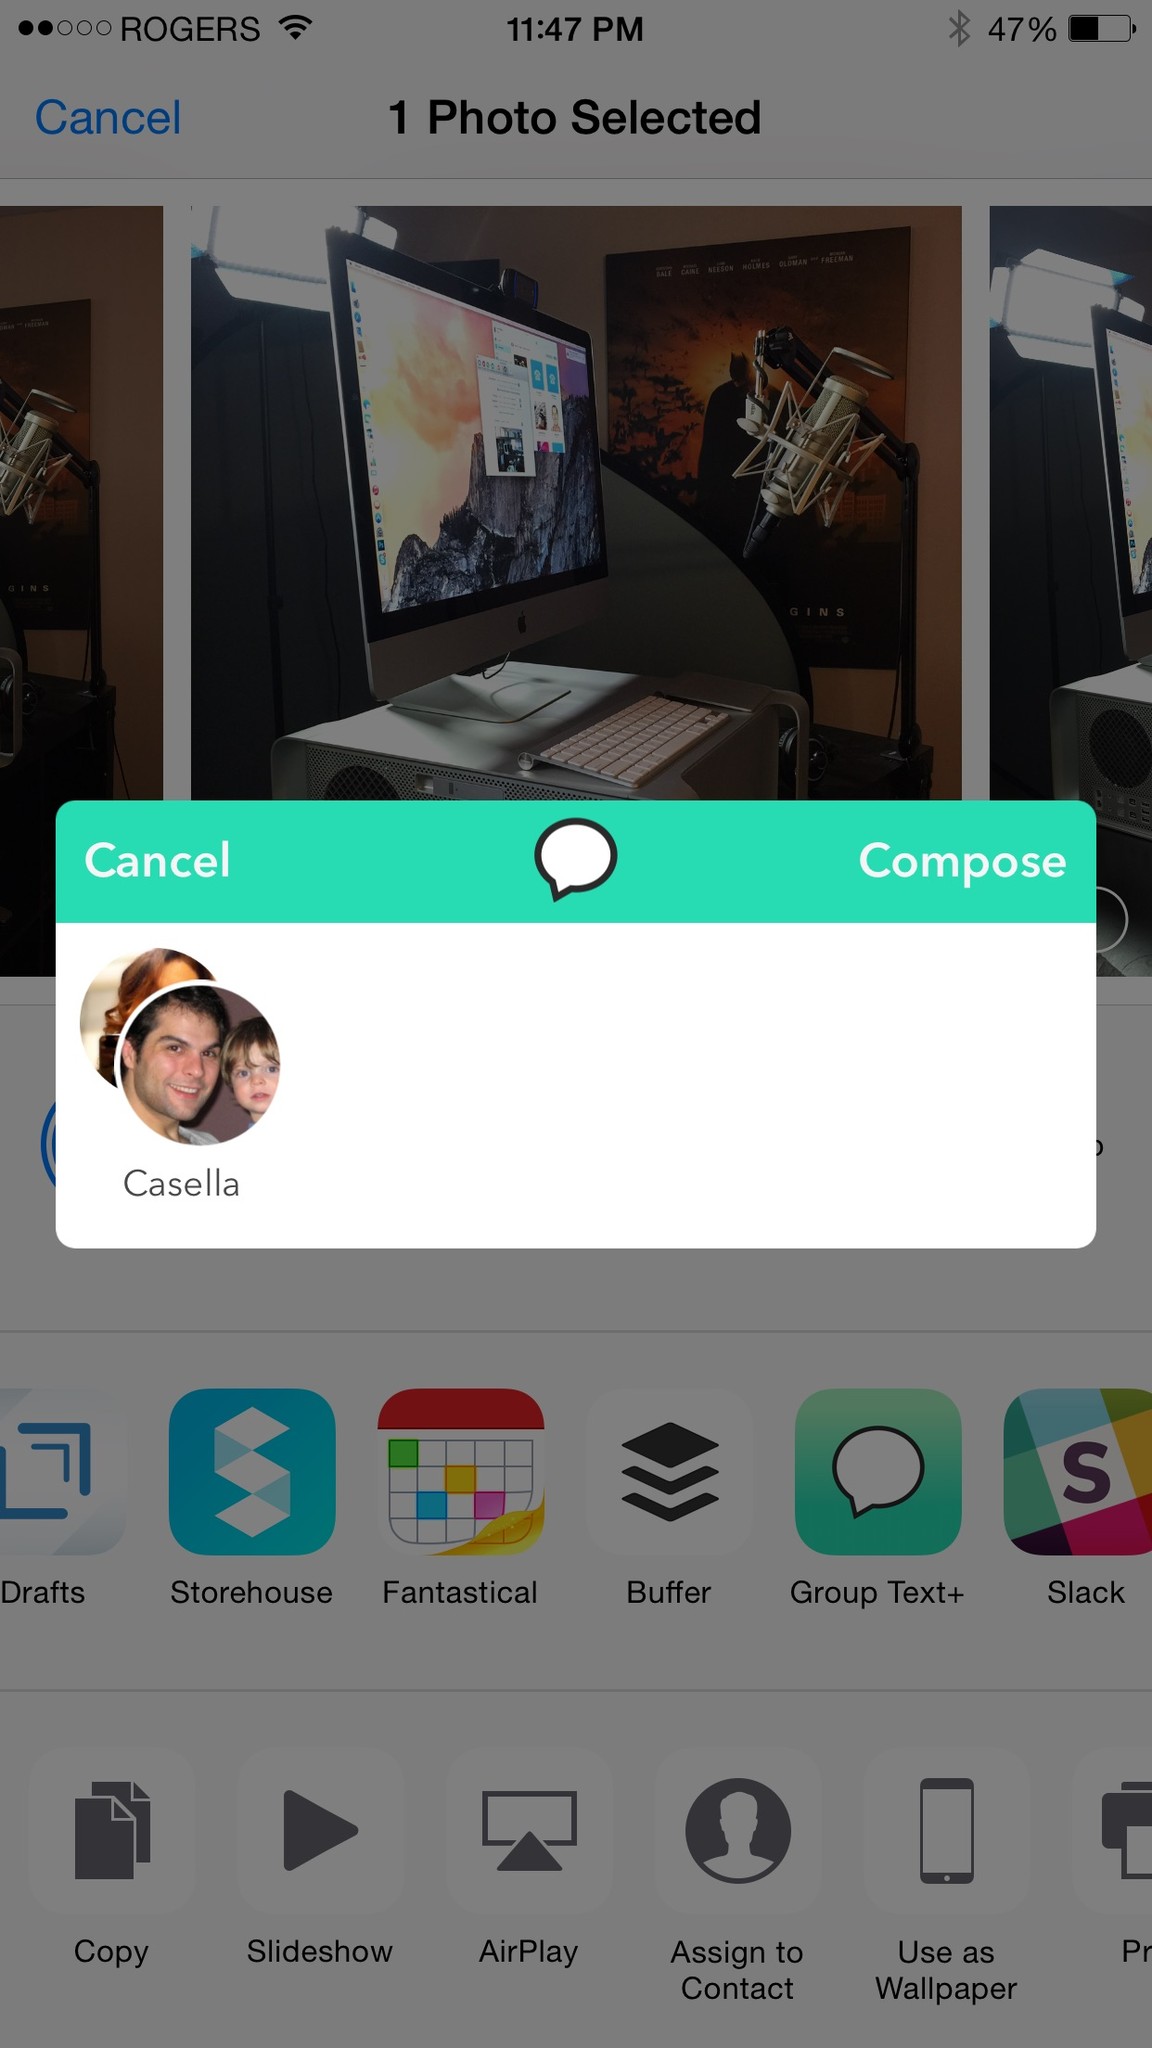 Group Text+ share extension